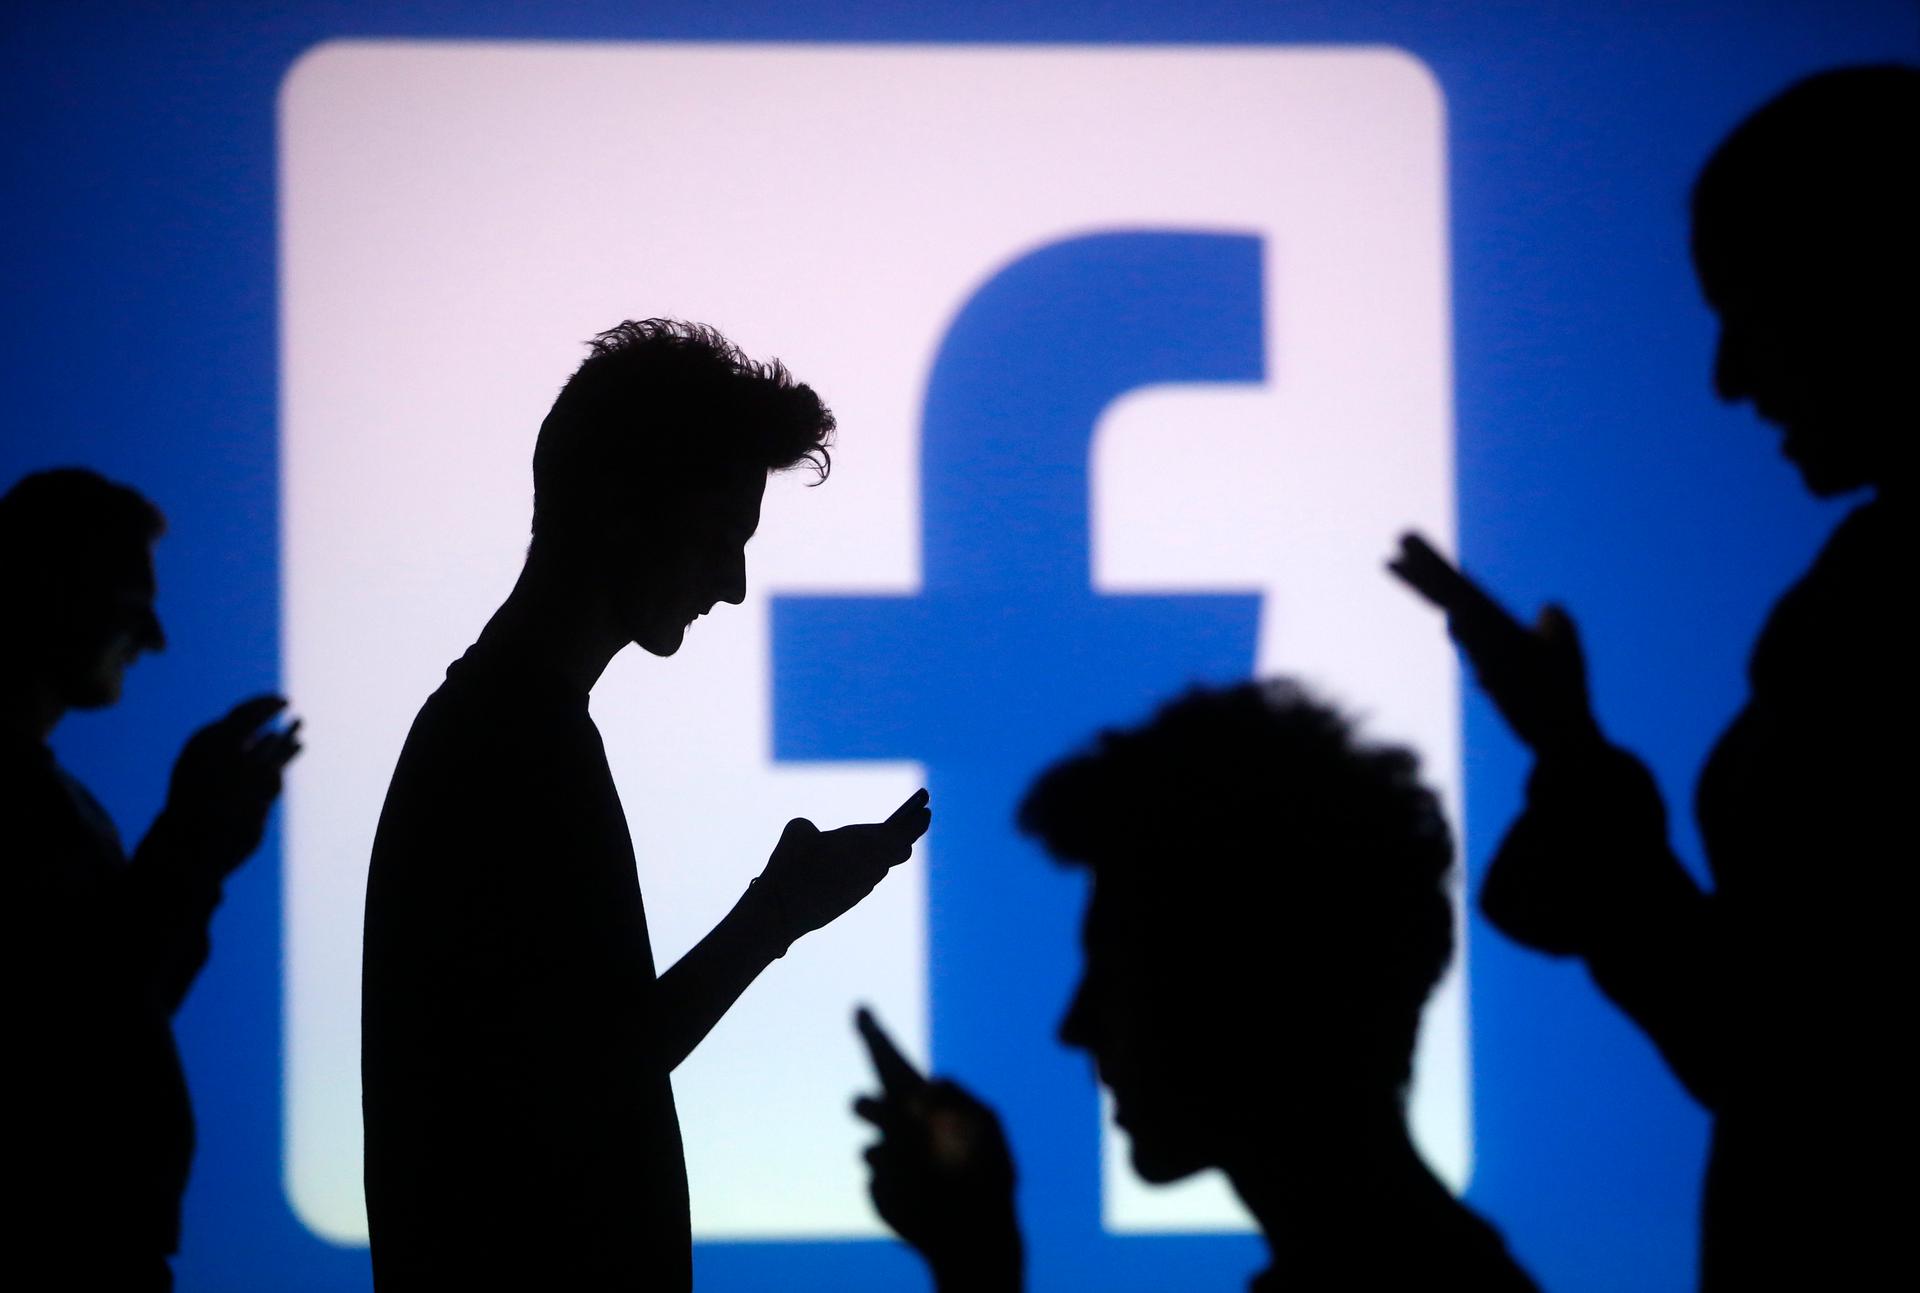 People are silhouetted as they pose with mobile devices in front of a screen projected with a Facebook logo